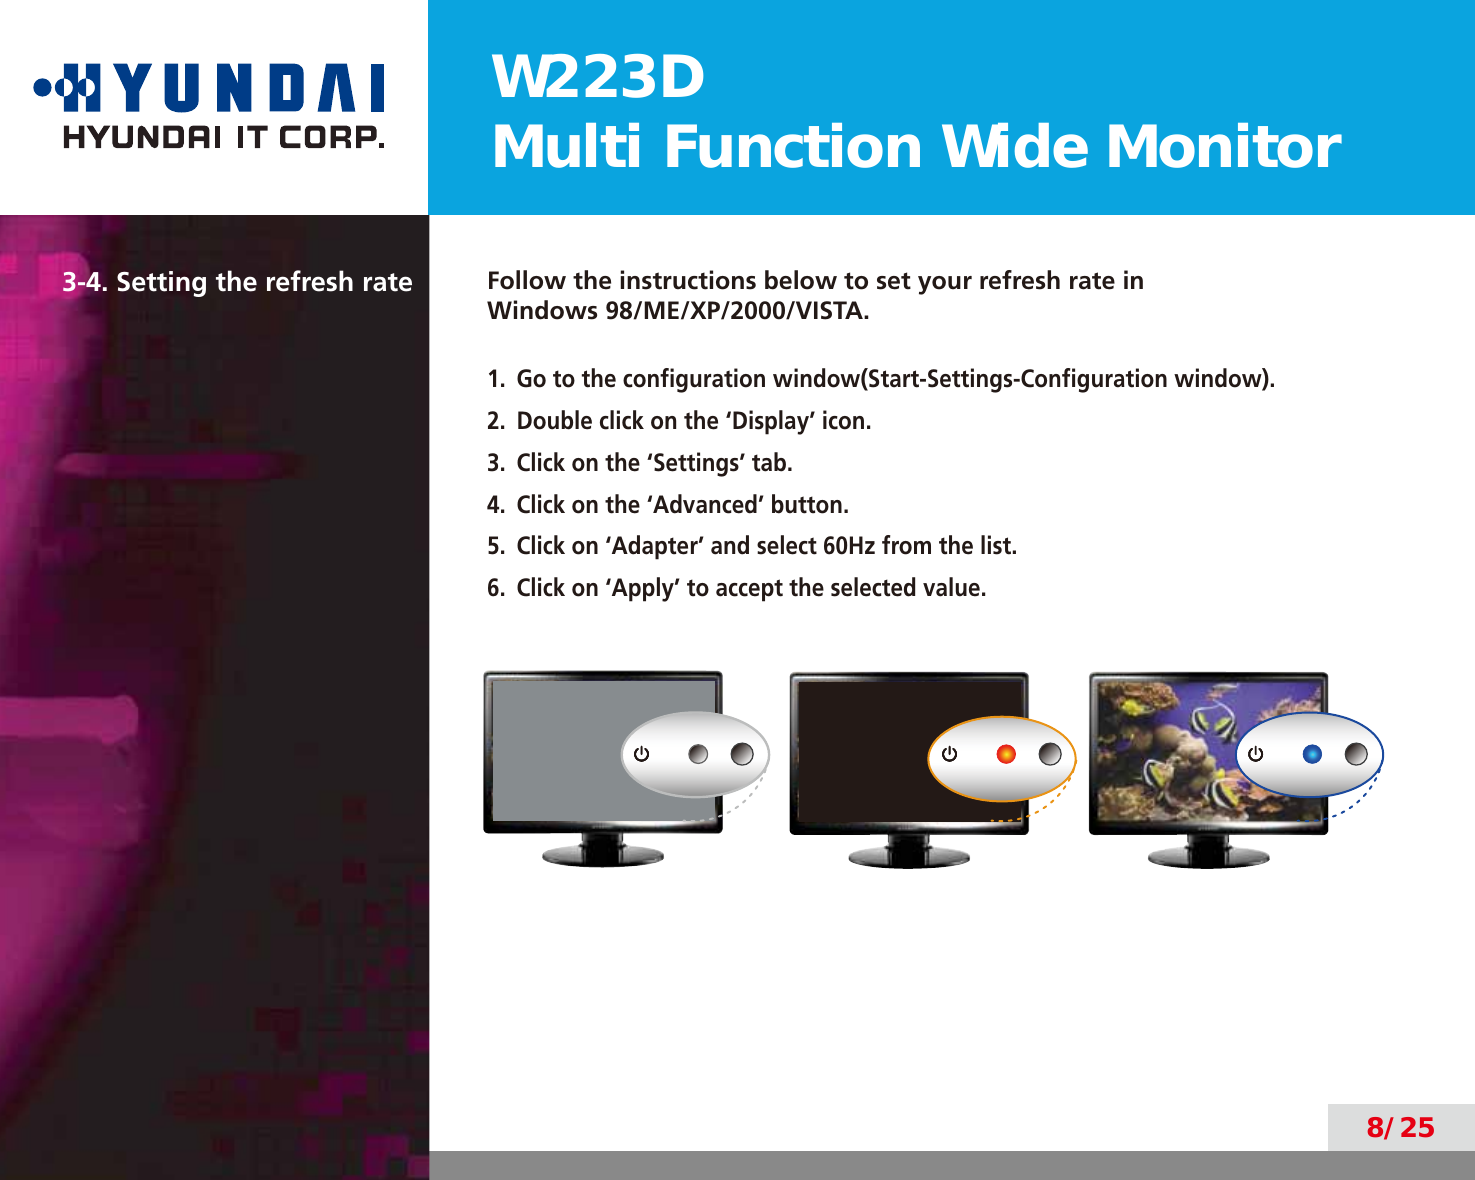 W223DMulti Function Wide Monitor8/253-4. Setting the refresh rate Follow the instructions below to set your refresh rate in  Windows 98/ME/XP/2000/VISTA.1.  Go to the conﬁguration window(Start-Settings-Conﬁguration window).2.  Double click on the ‘Display’ icon.3.  Click on the ‘Settings’ tab.4.  Click on the ‘Advanced’ button.5.  Click on ‘Adapter’ and select 60Hz from the list.6.  Click on ‘Apply’ to accept the selected value. 